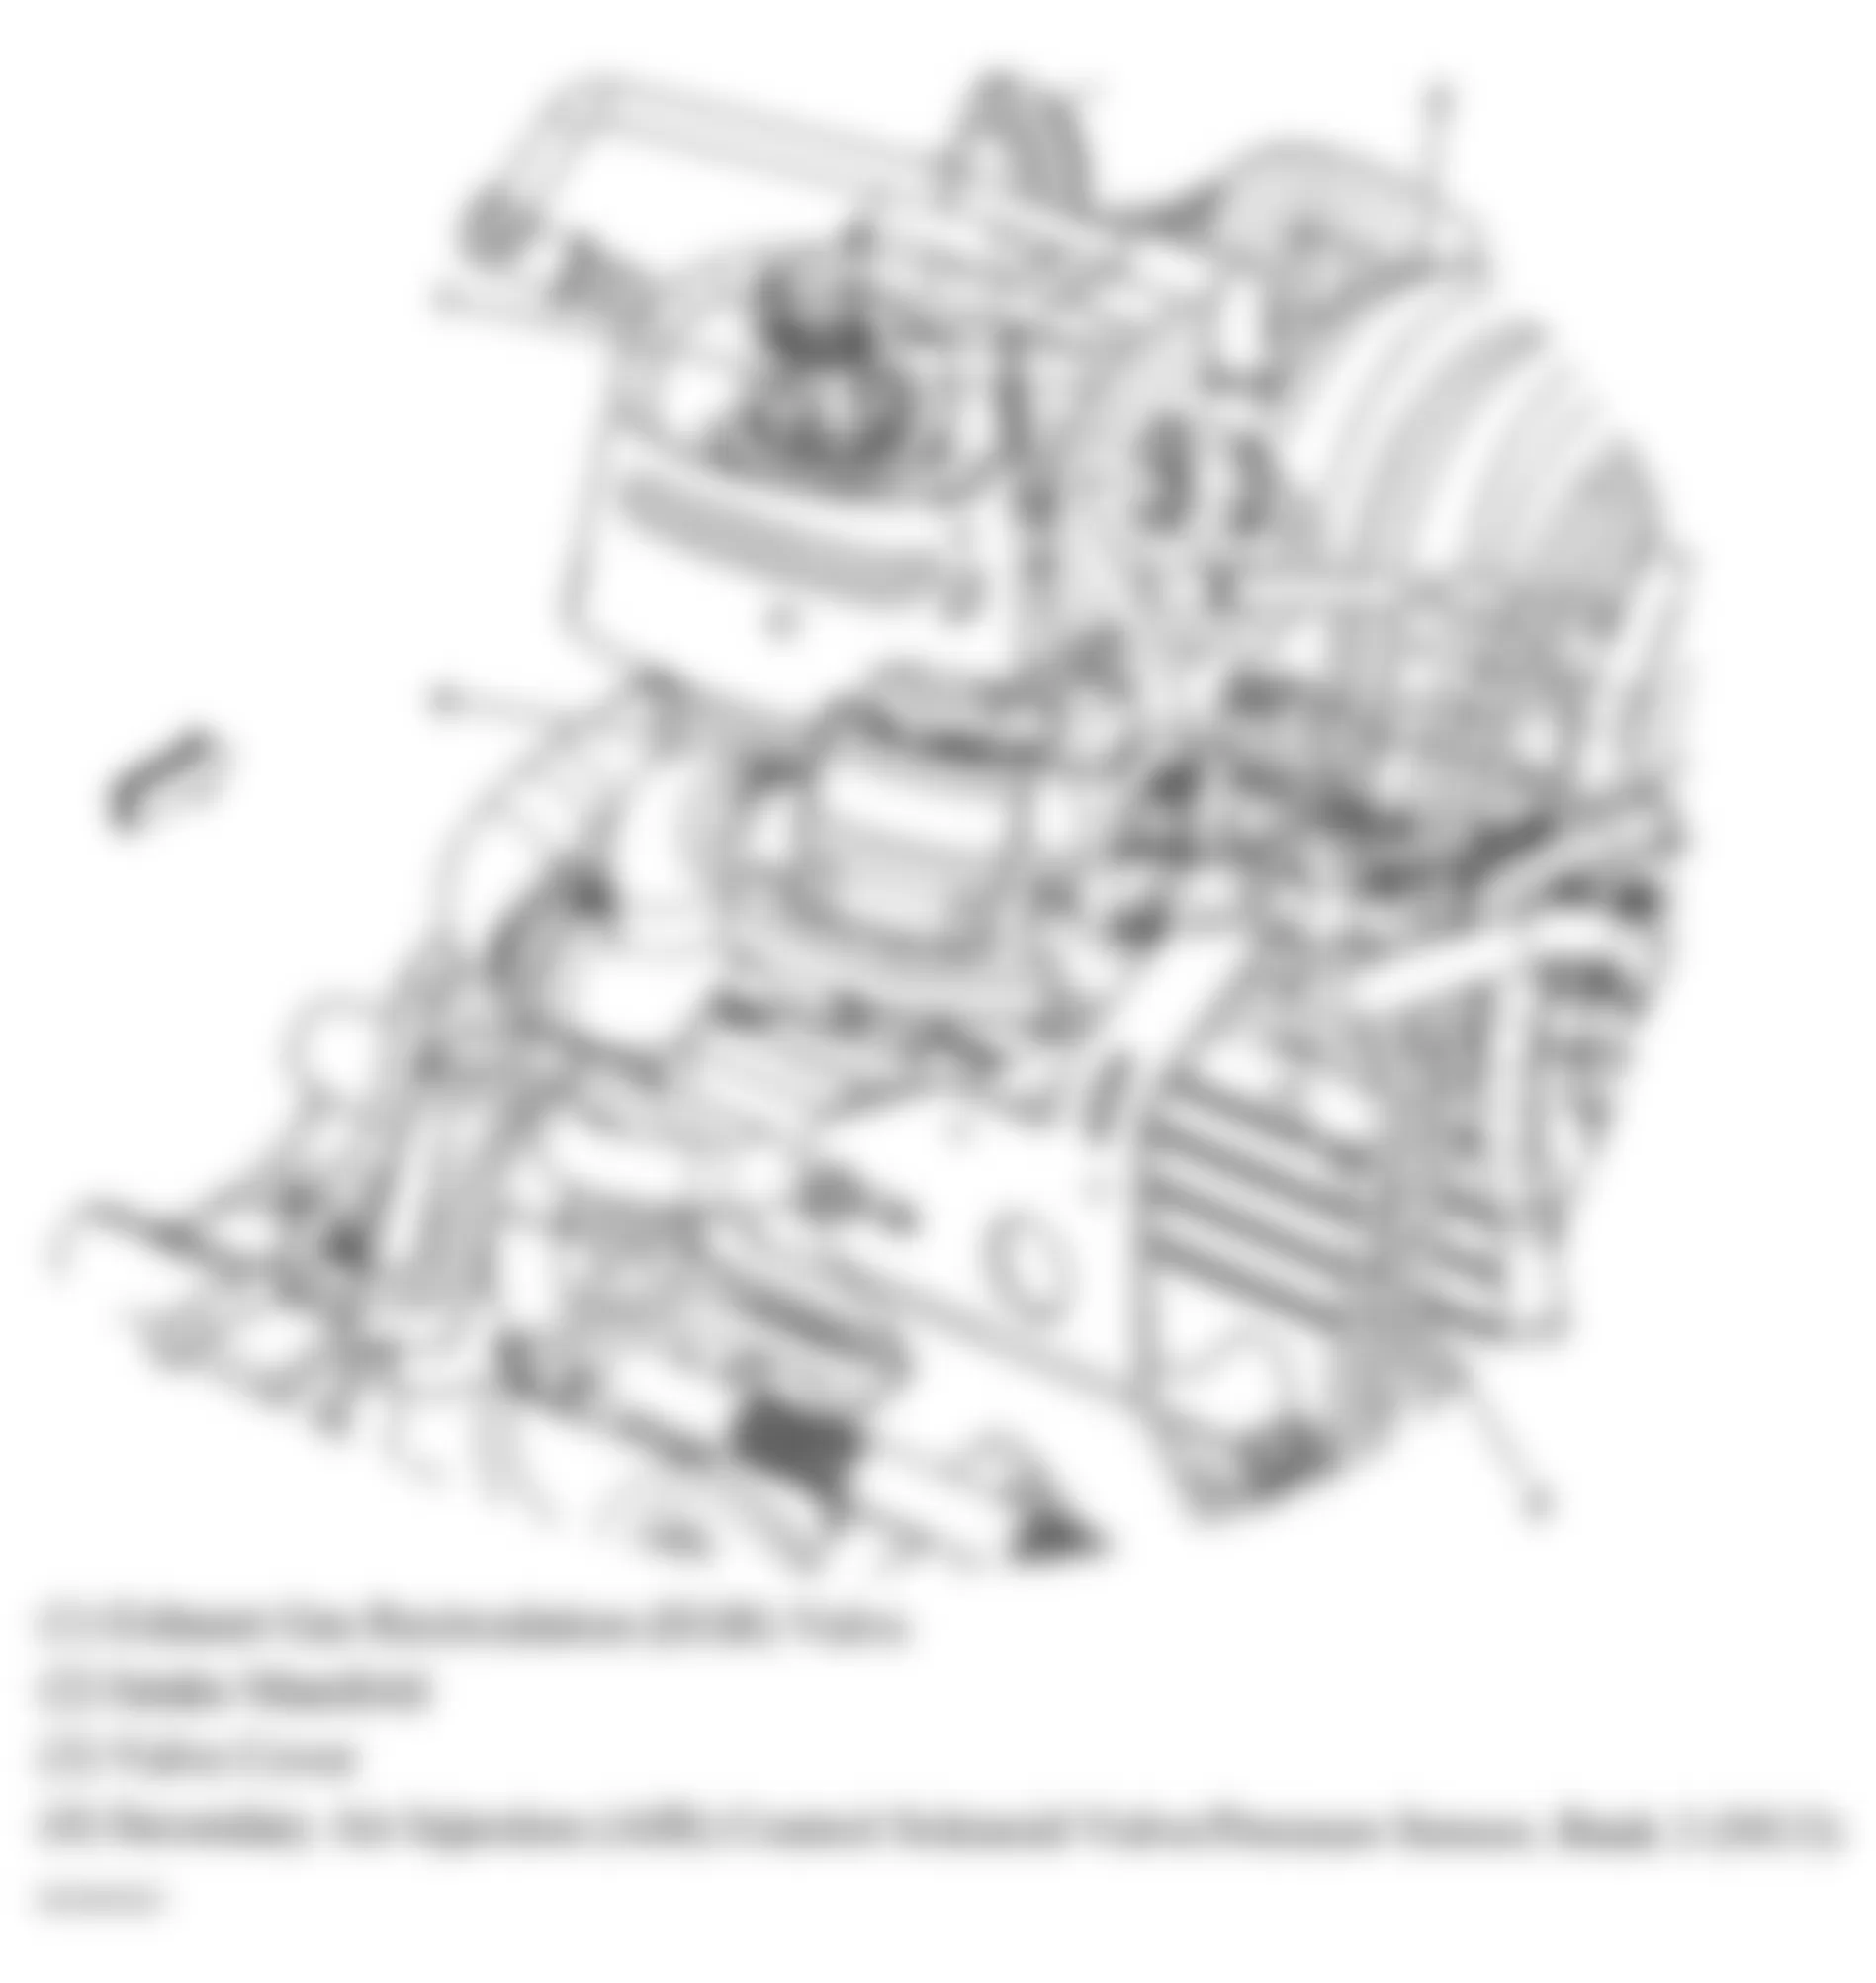 Buick Allure CXS 2005 - Component Locations -  Upper Rear Of Engine (3.8L)